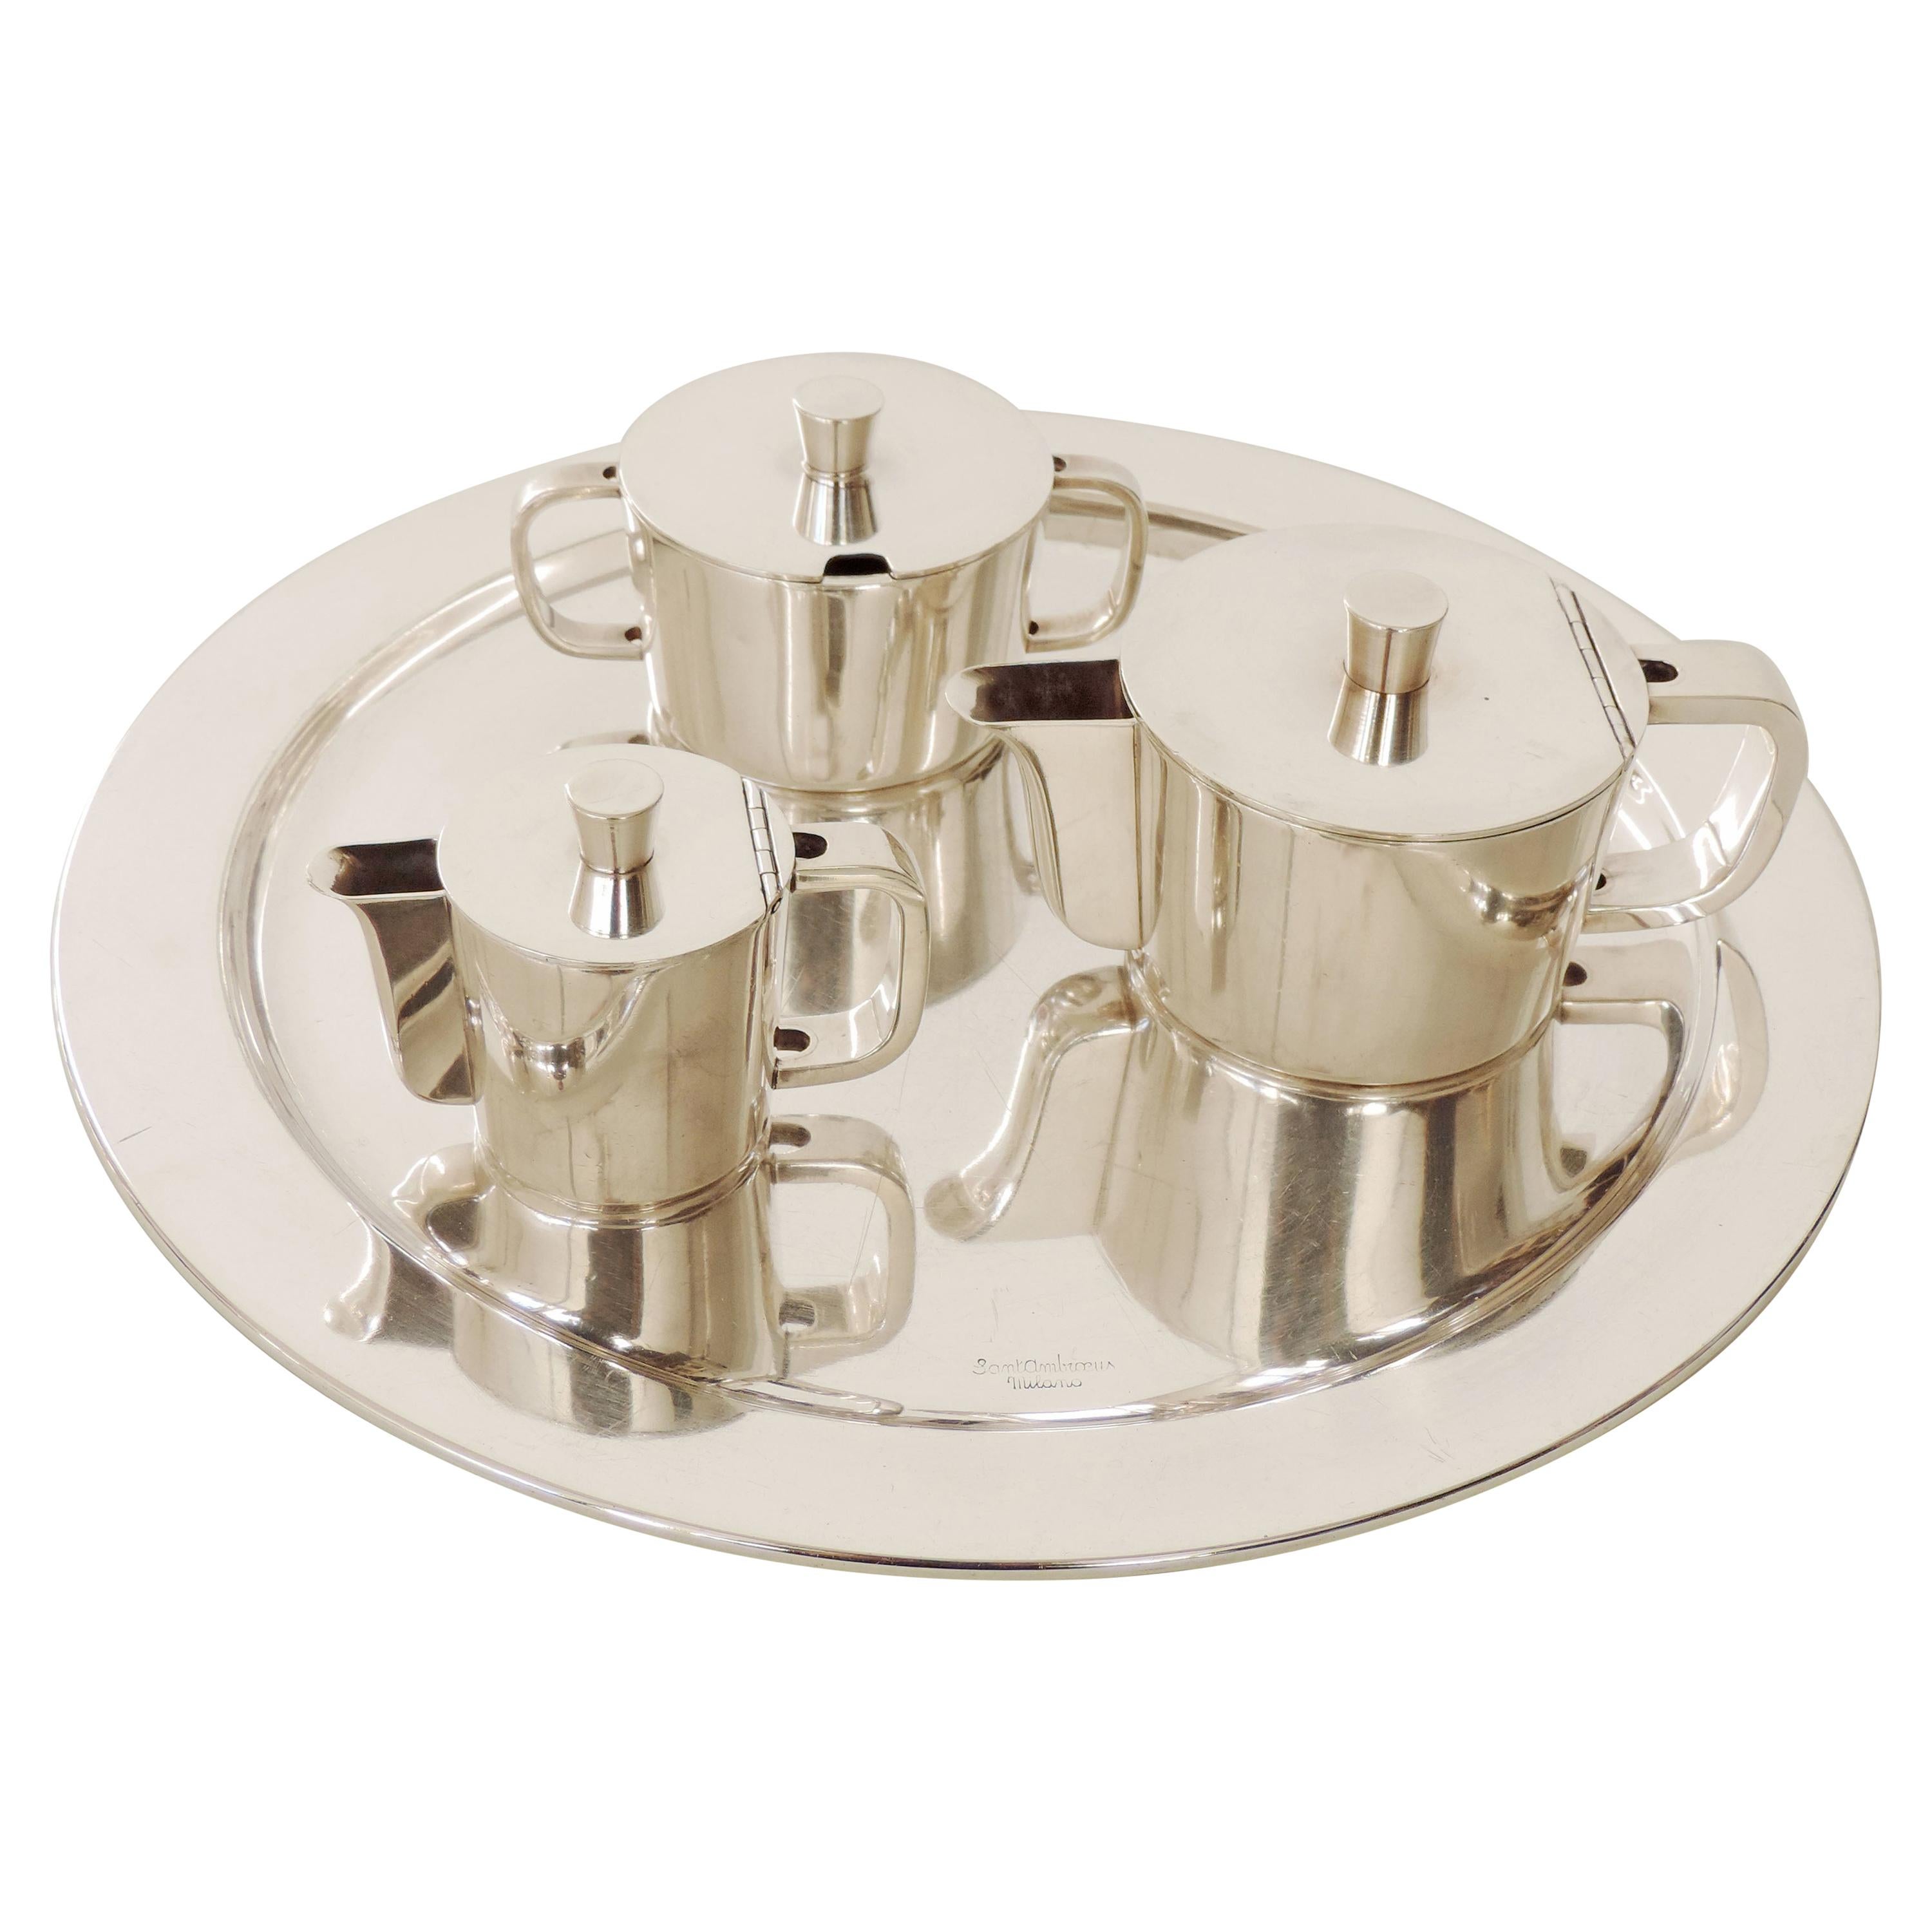 Gio Ponti Coffee Set for the Historical Sant Ambroeus Coffee House, Italy, 1940s